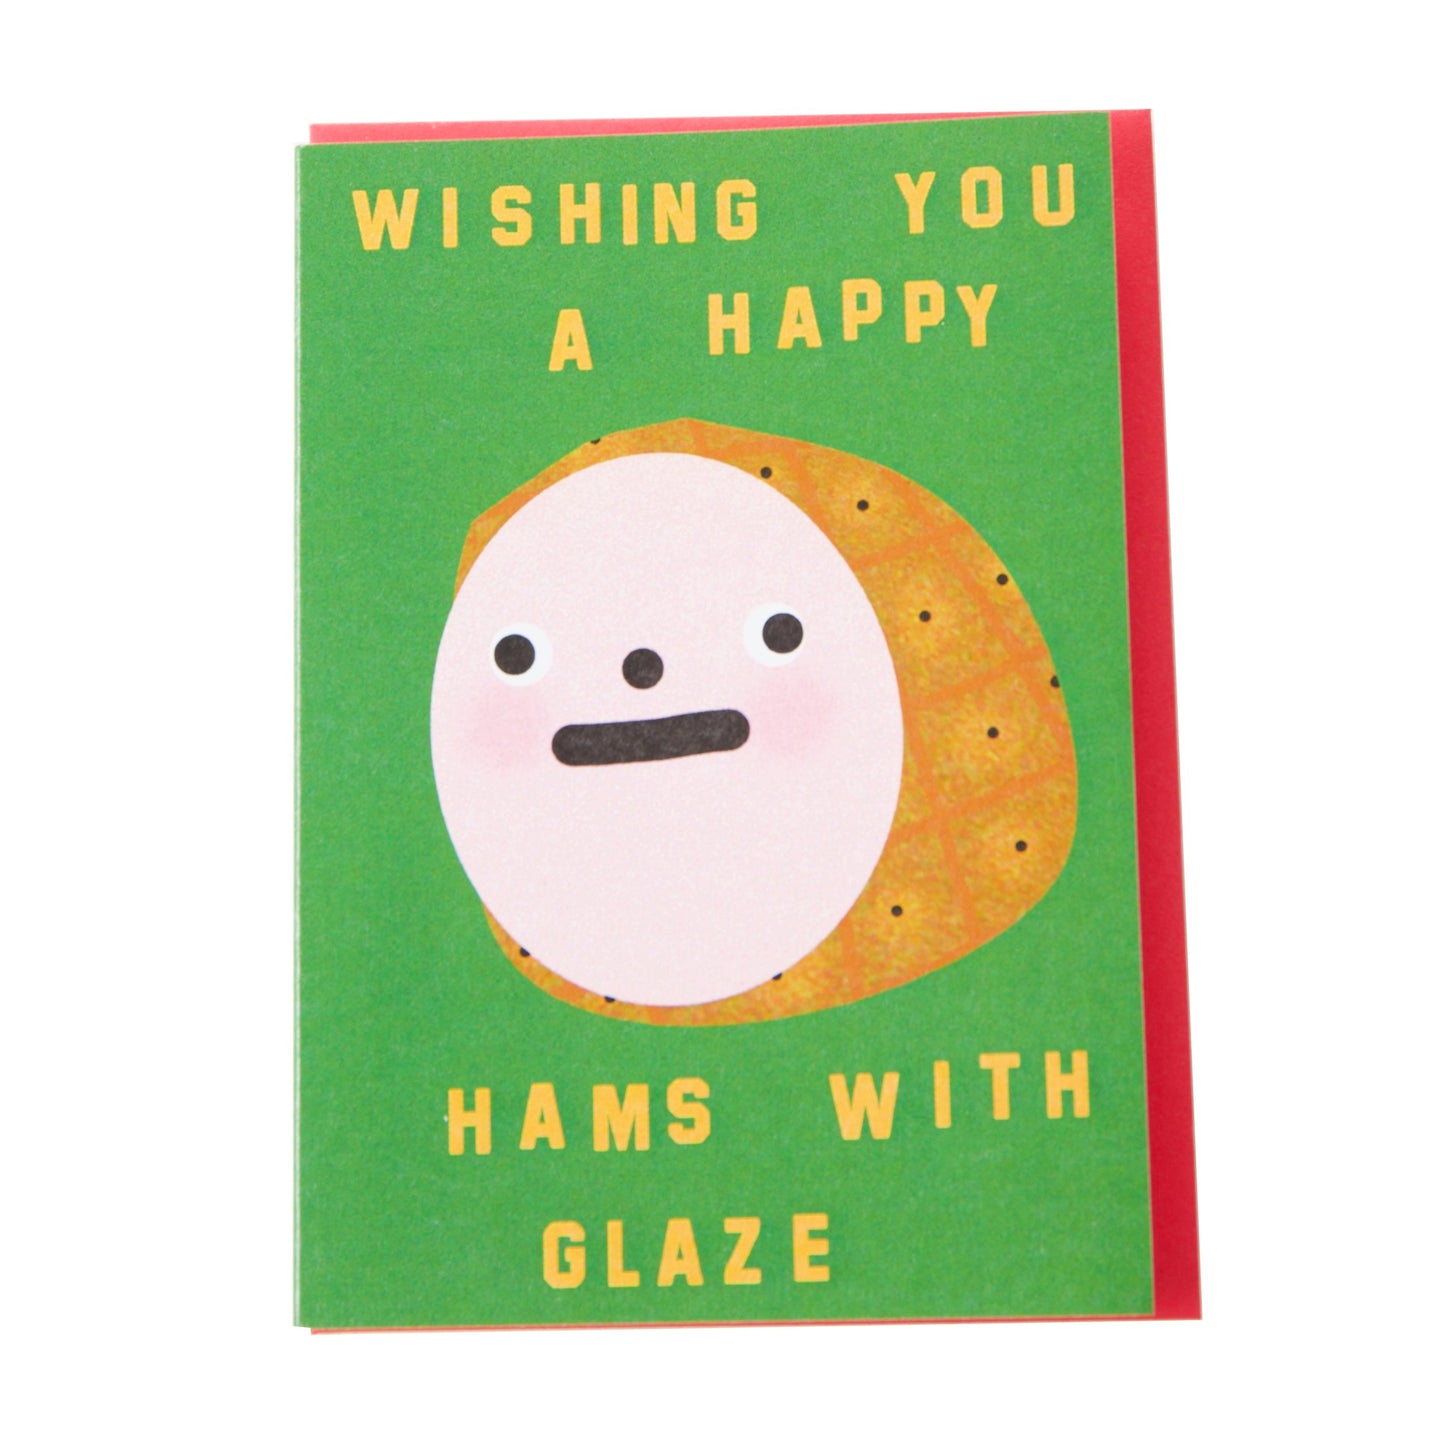 Holiday greeting card -- it reads "Wishing You a Happy Hams with Glaze" and has a glazed ham with a face on it 